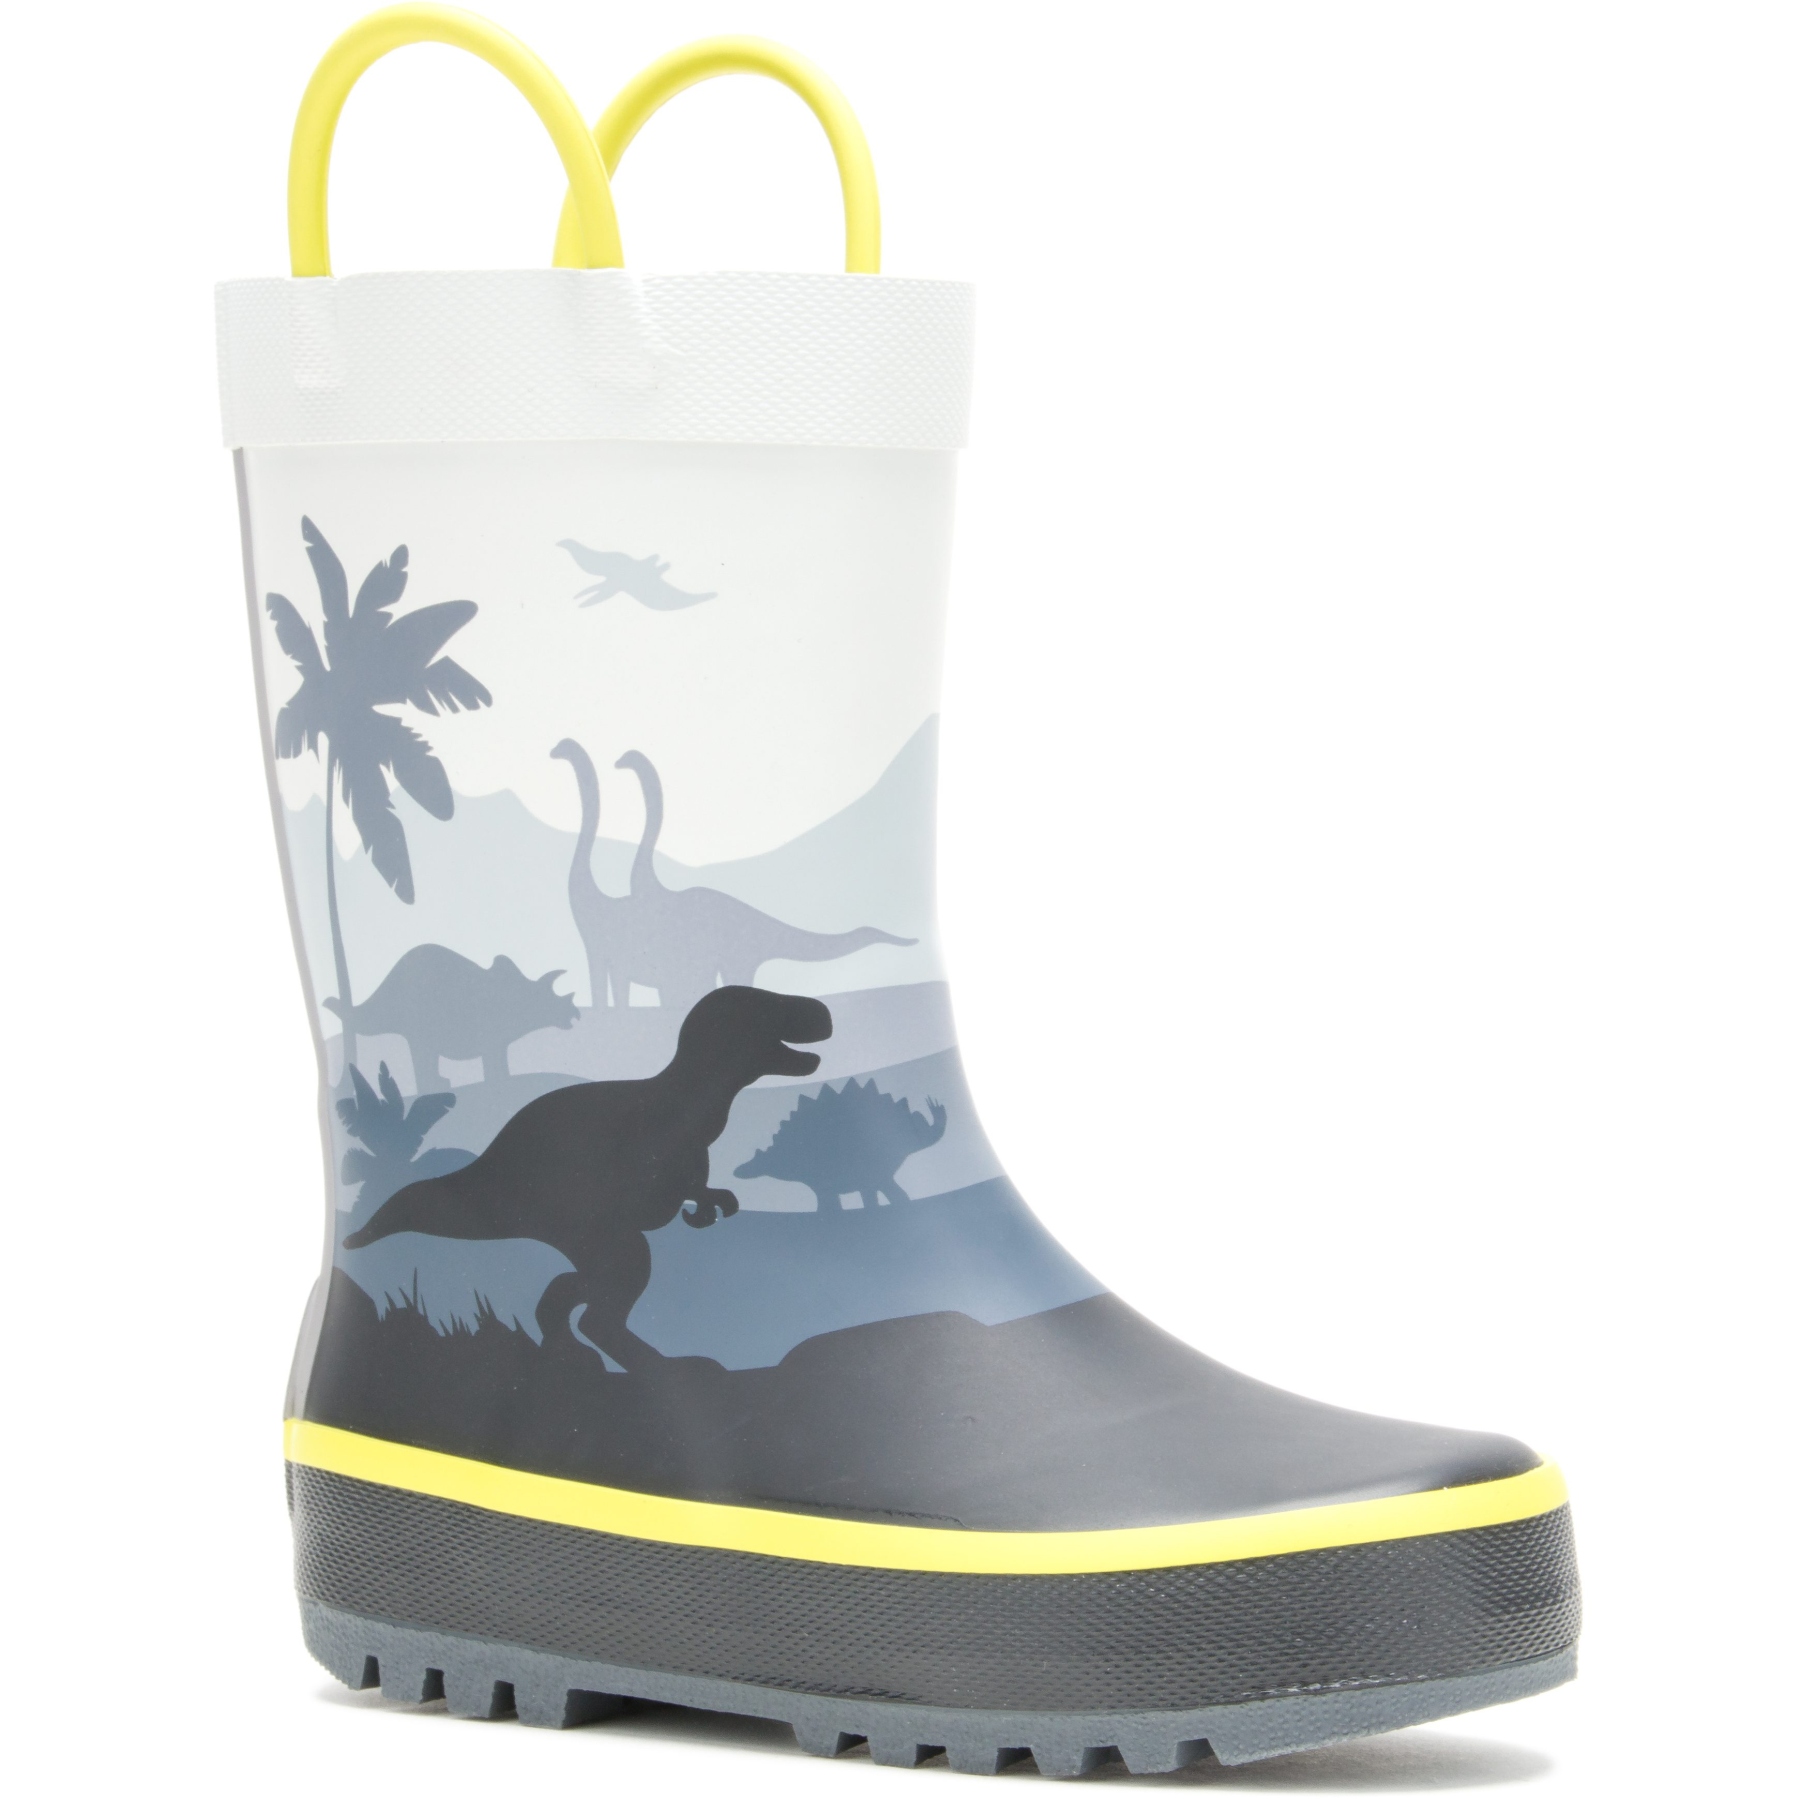 Productfoto van Kamik Dino Toddlers Rubber Boots - Grey (Size 20-27)